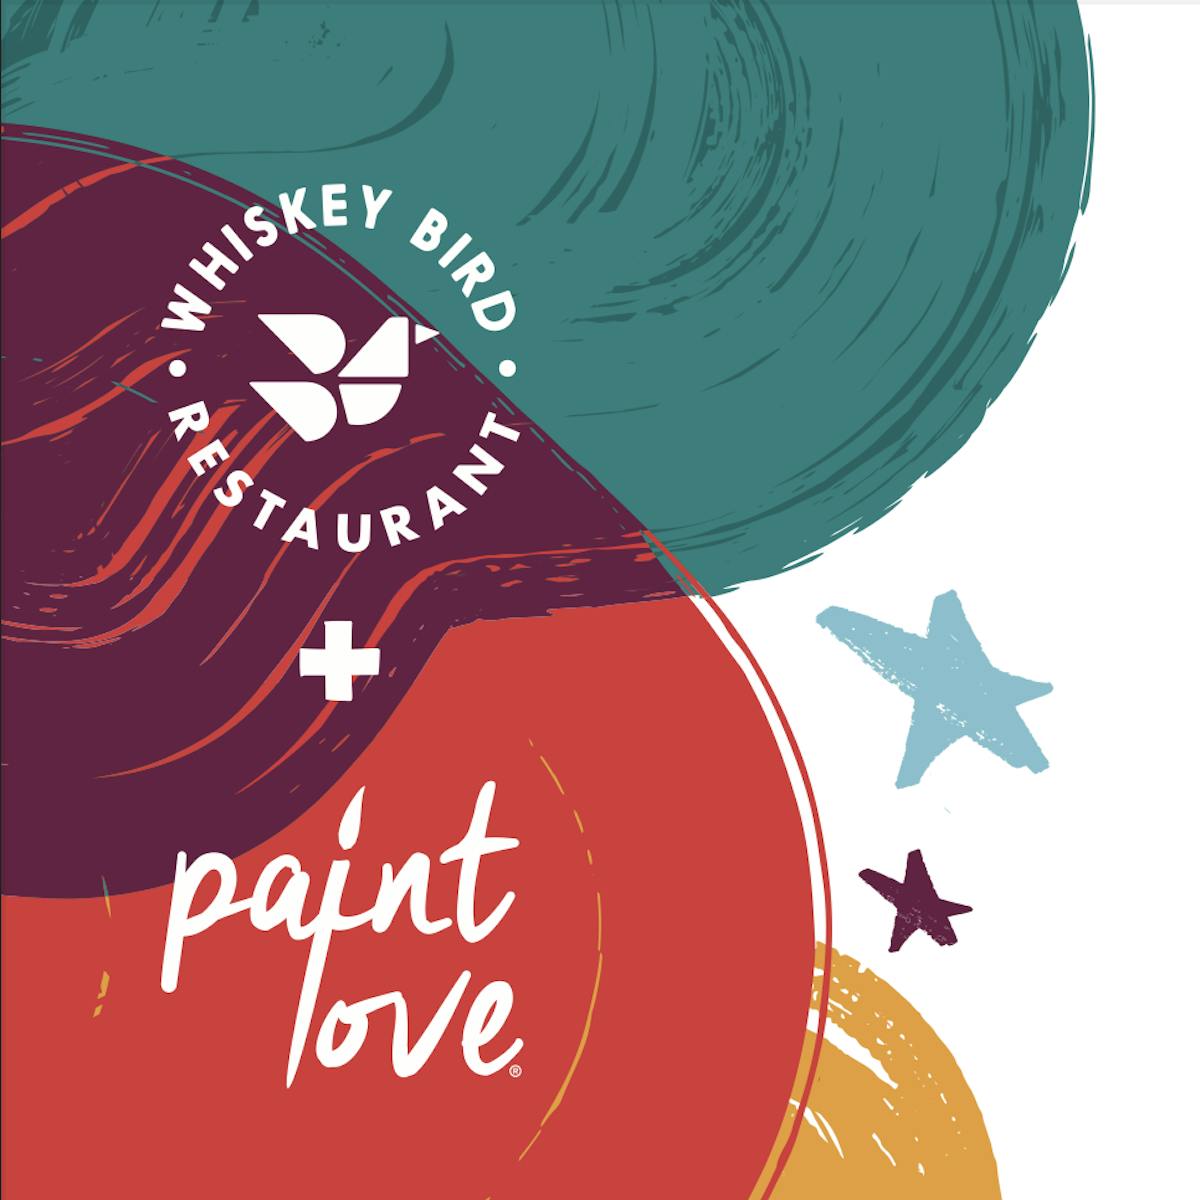 Whiskey Bird and Paint Love